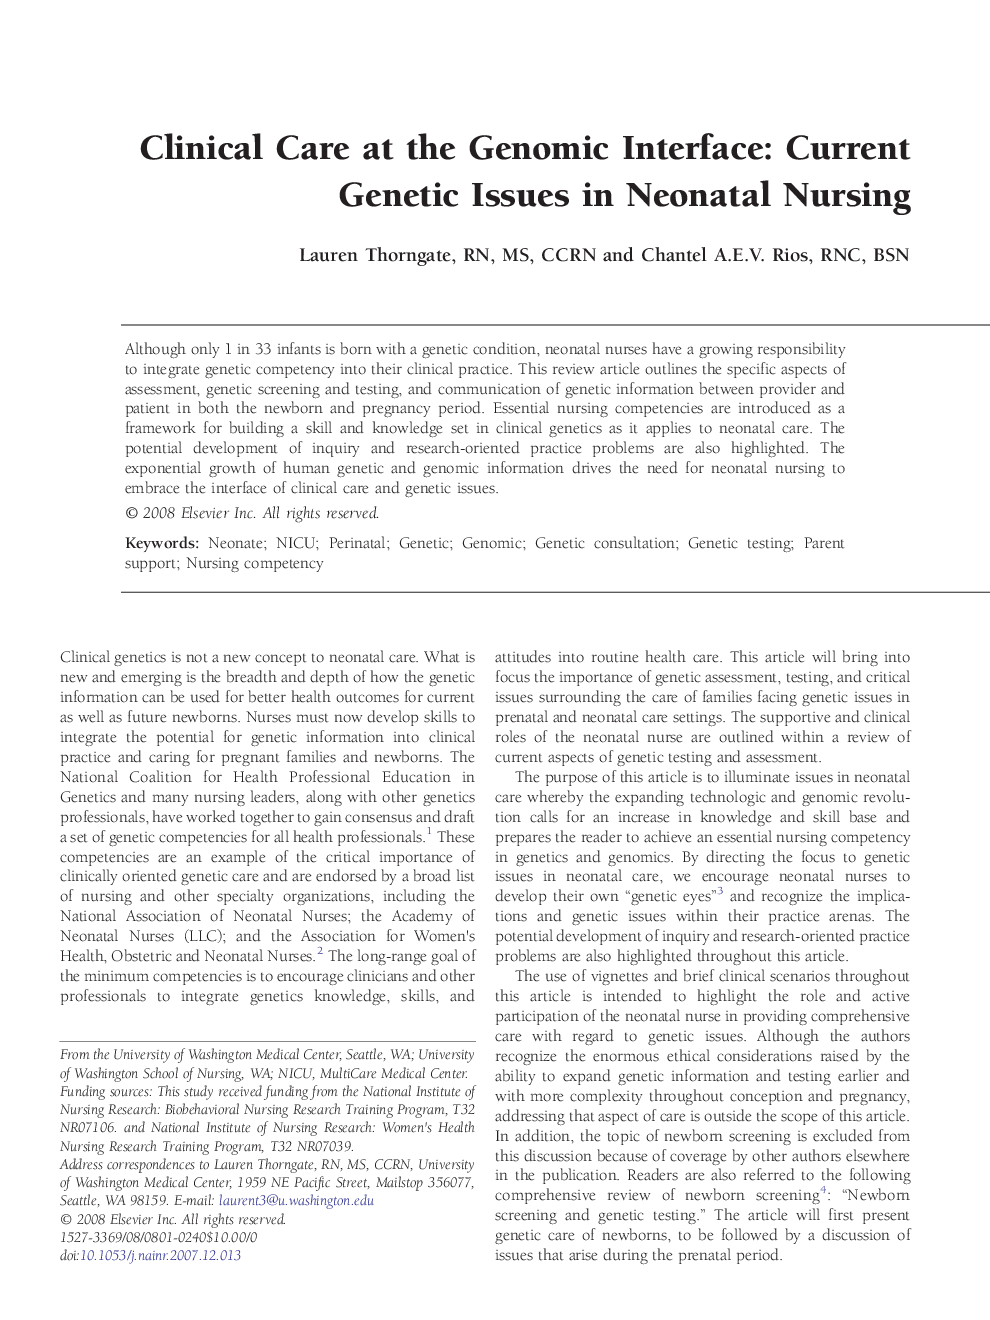 Clinical Care at the Genomic Interface: Current Genetic Issues in Neonatal Nursing 